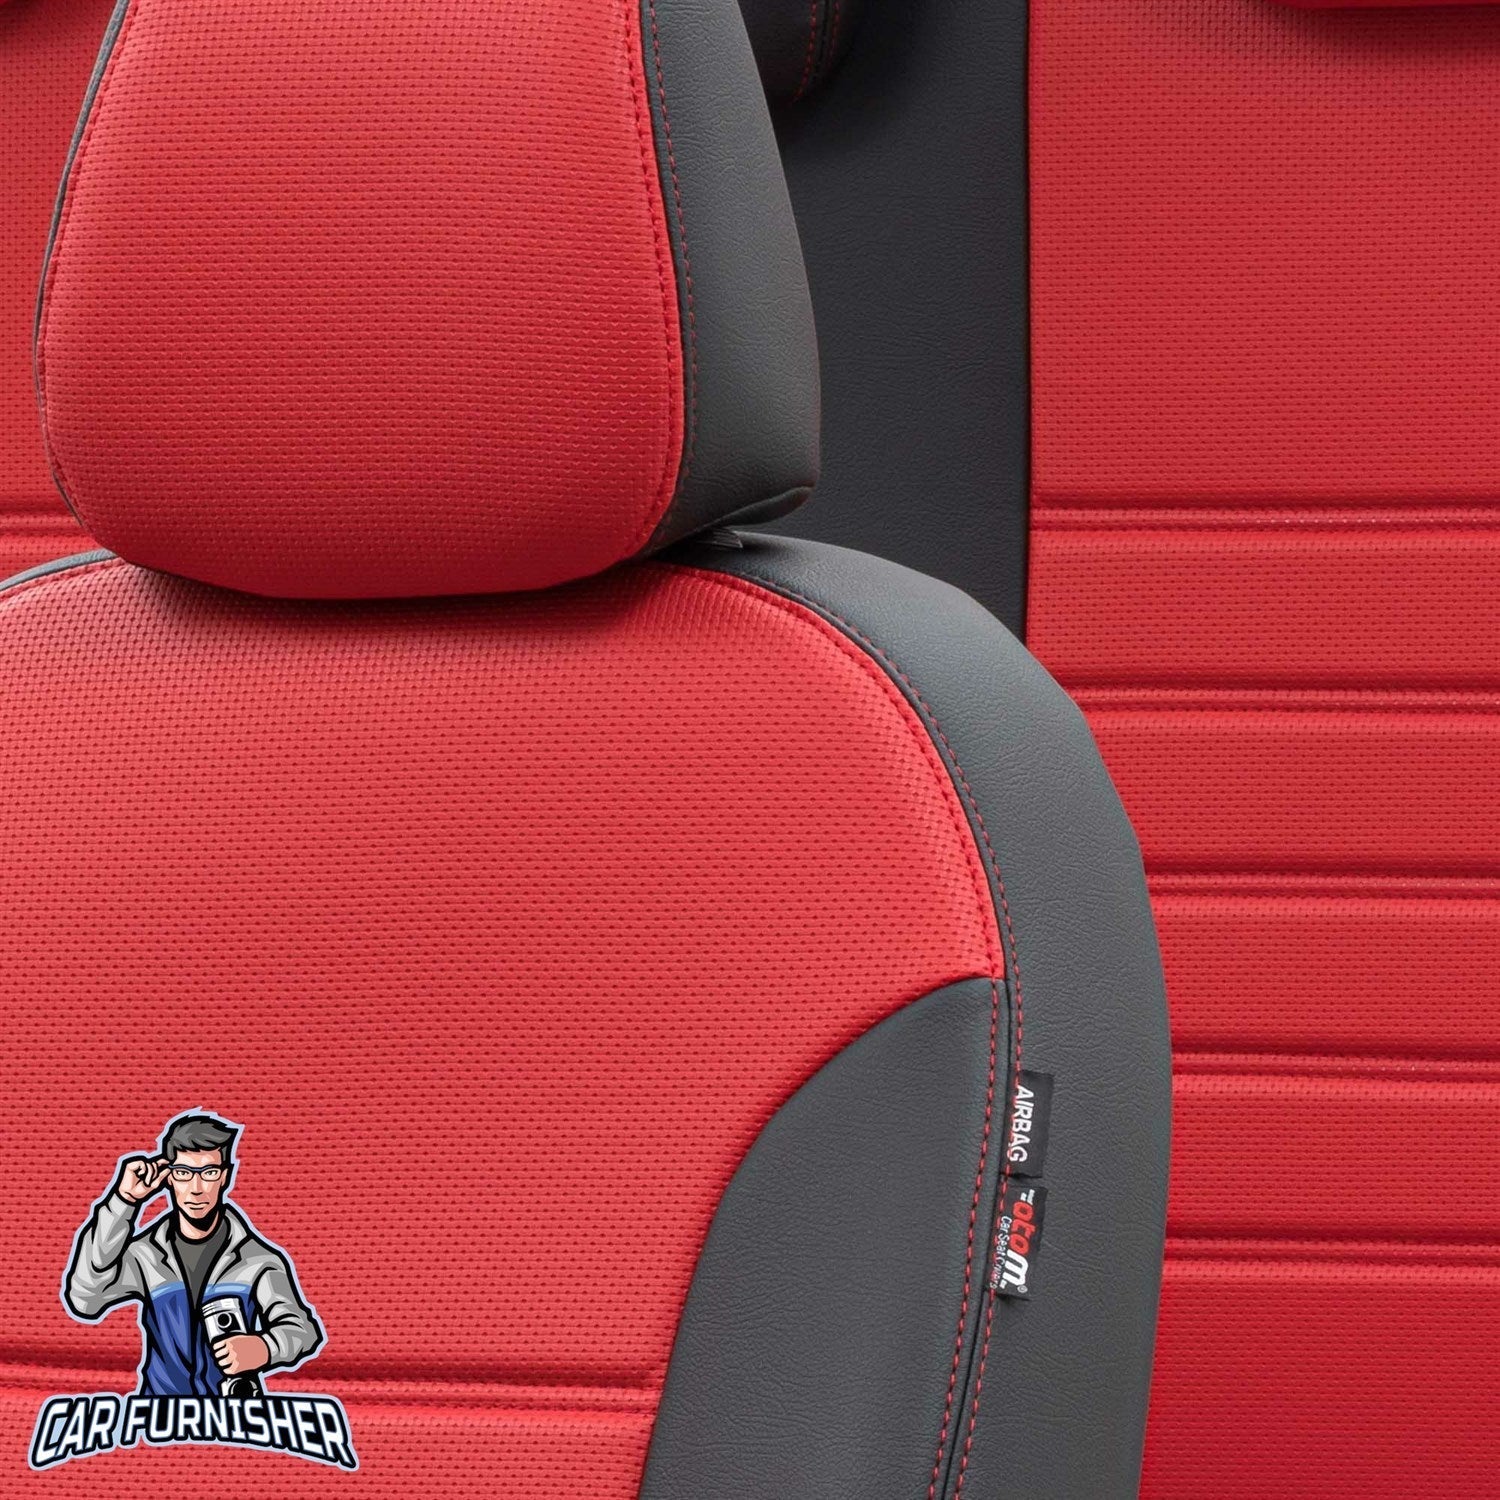 Renault Kangoo Seat Covers New York Leather Design Red Leather